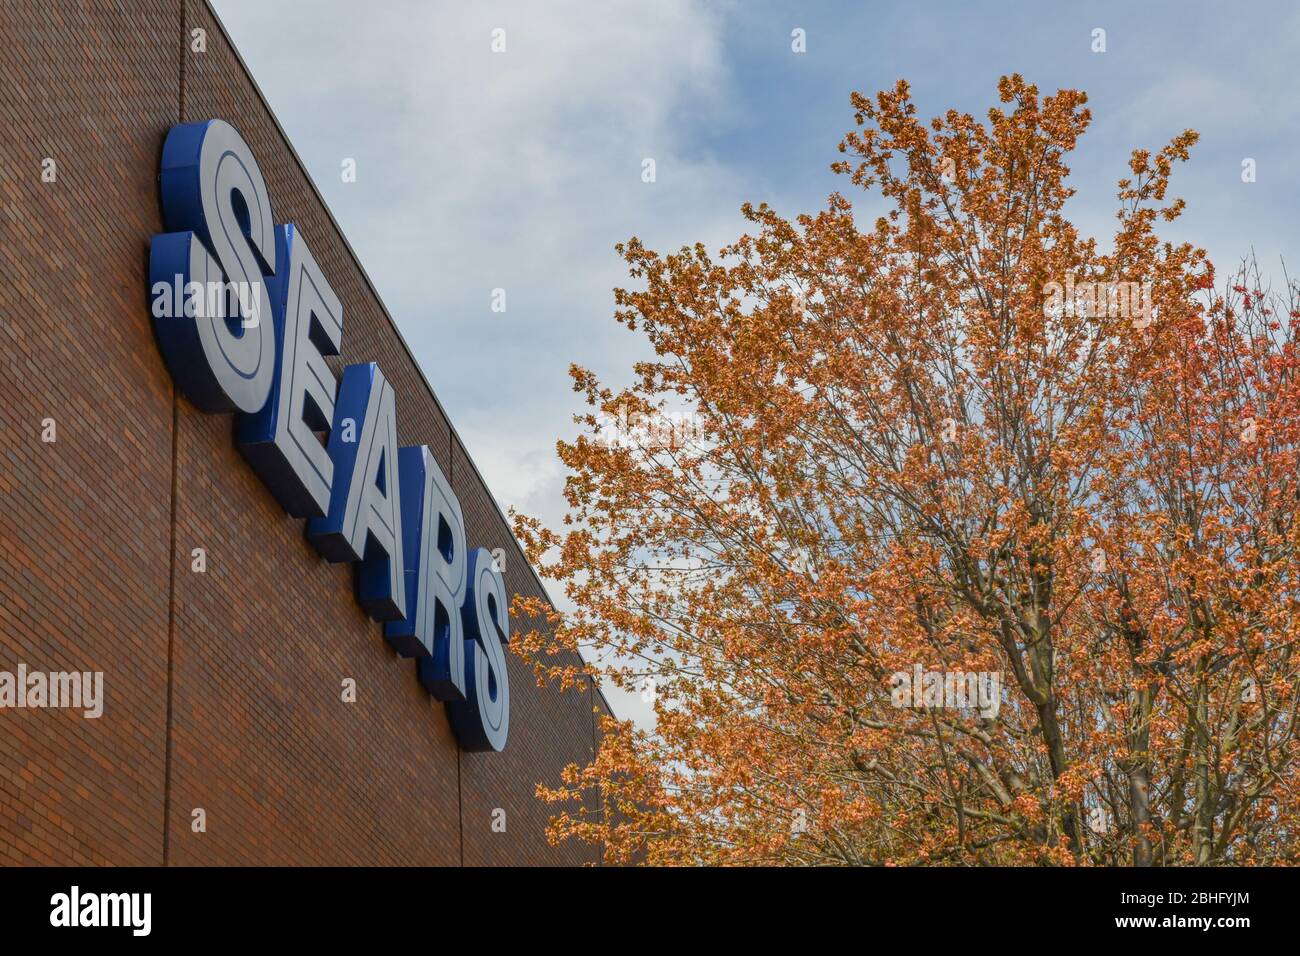 Sears Department Store in danger of going out of business -  close to bankruptcy or bankrupt - businesses harmed by Covid-19 depression / recession Stock Photo